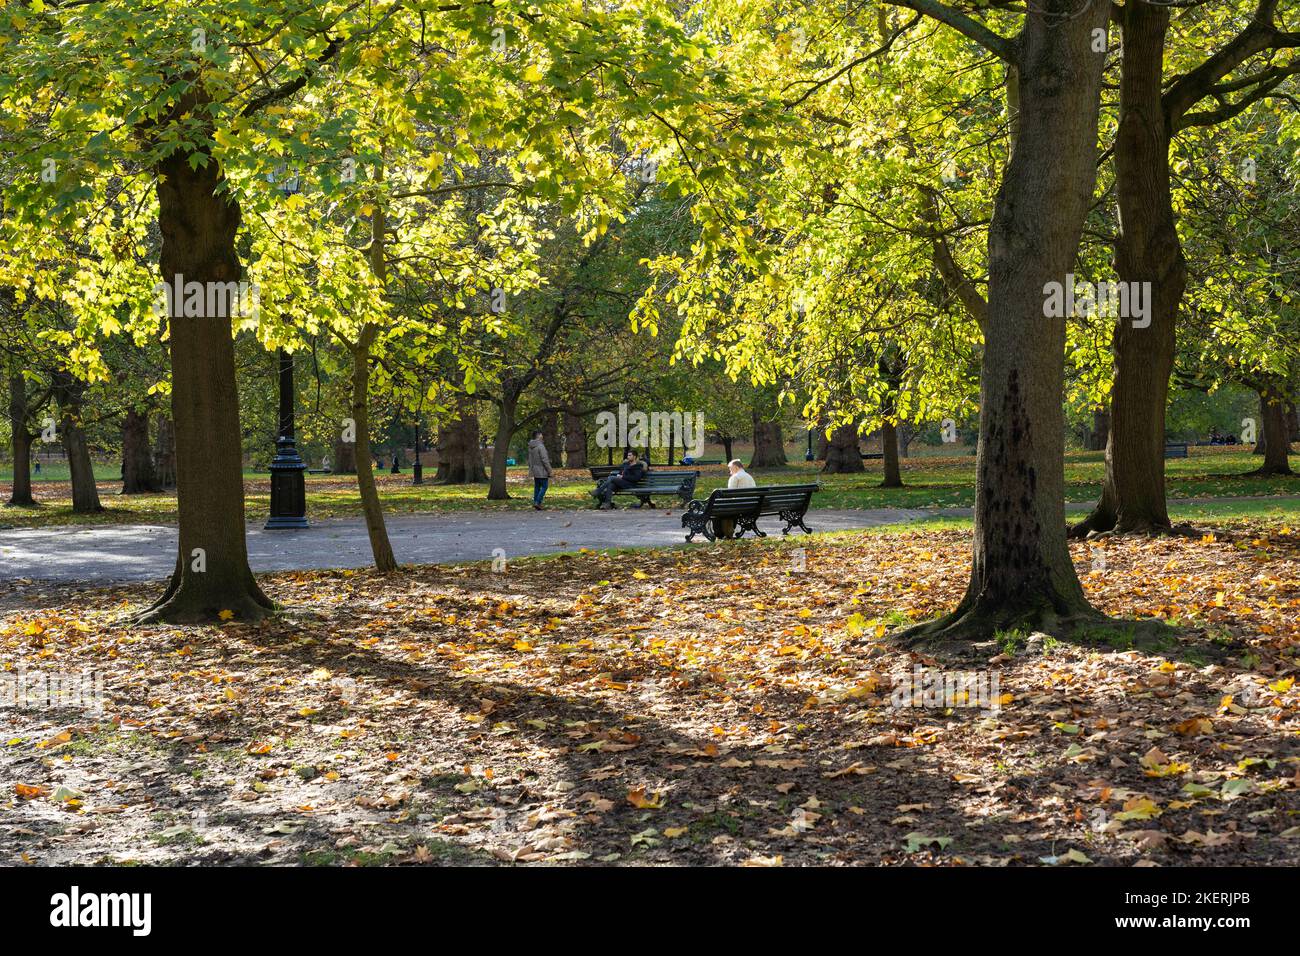 Man sitting on a bench in (The) Green Park - a Royal Park - on a sunny November autumn day with backlit trees & leaves on the ground. London, England Stock Photo